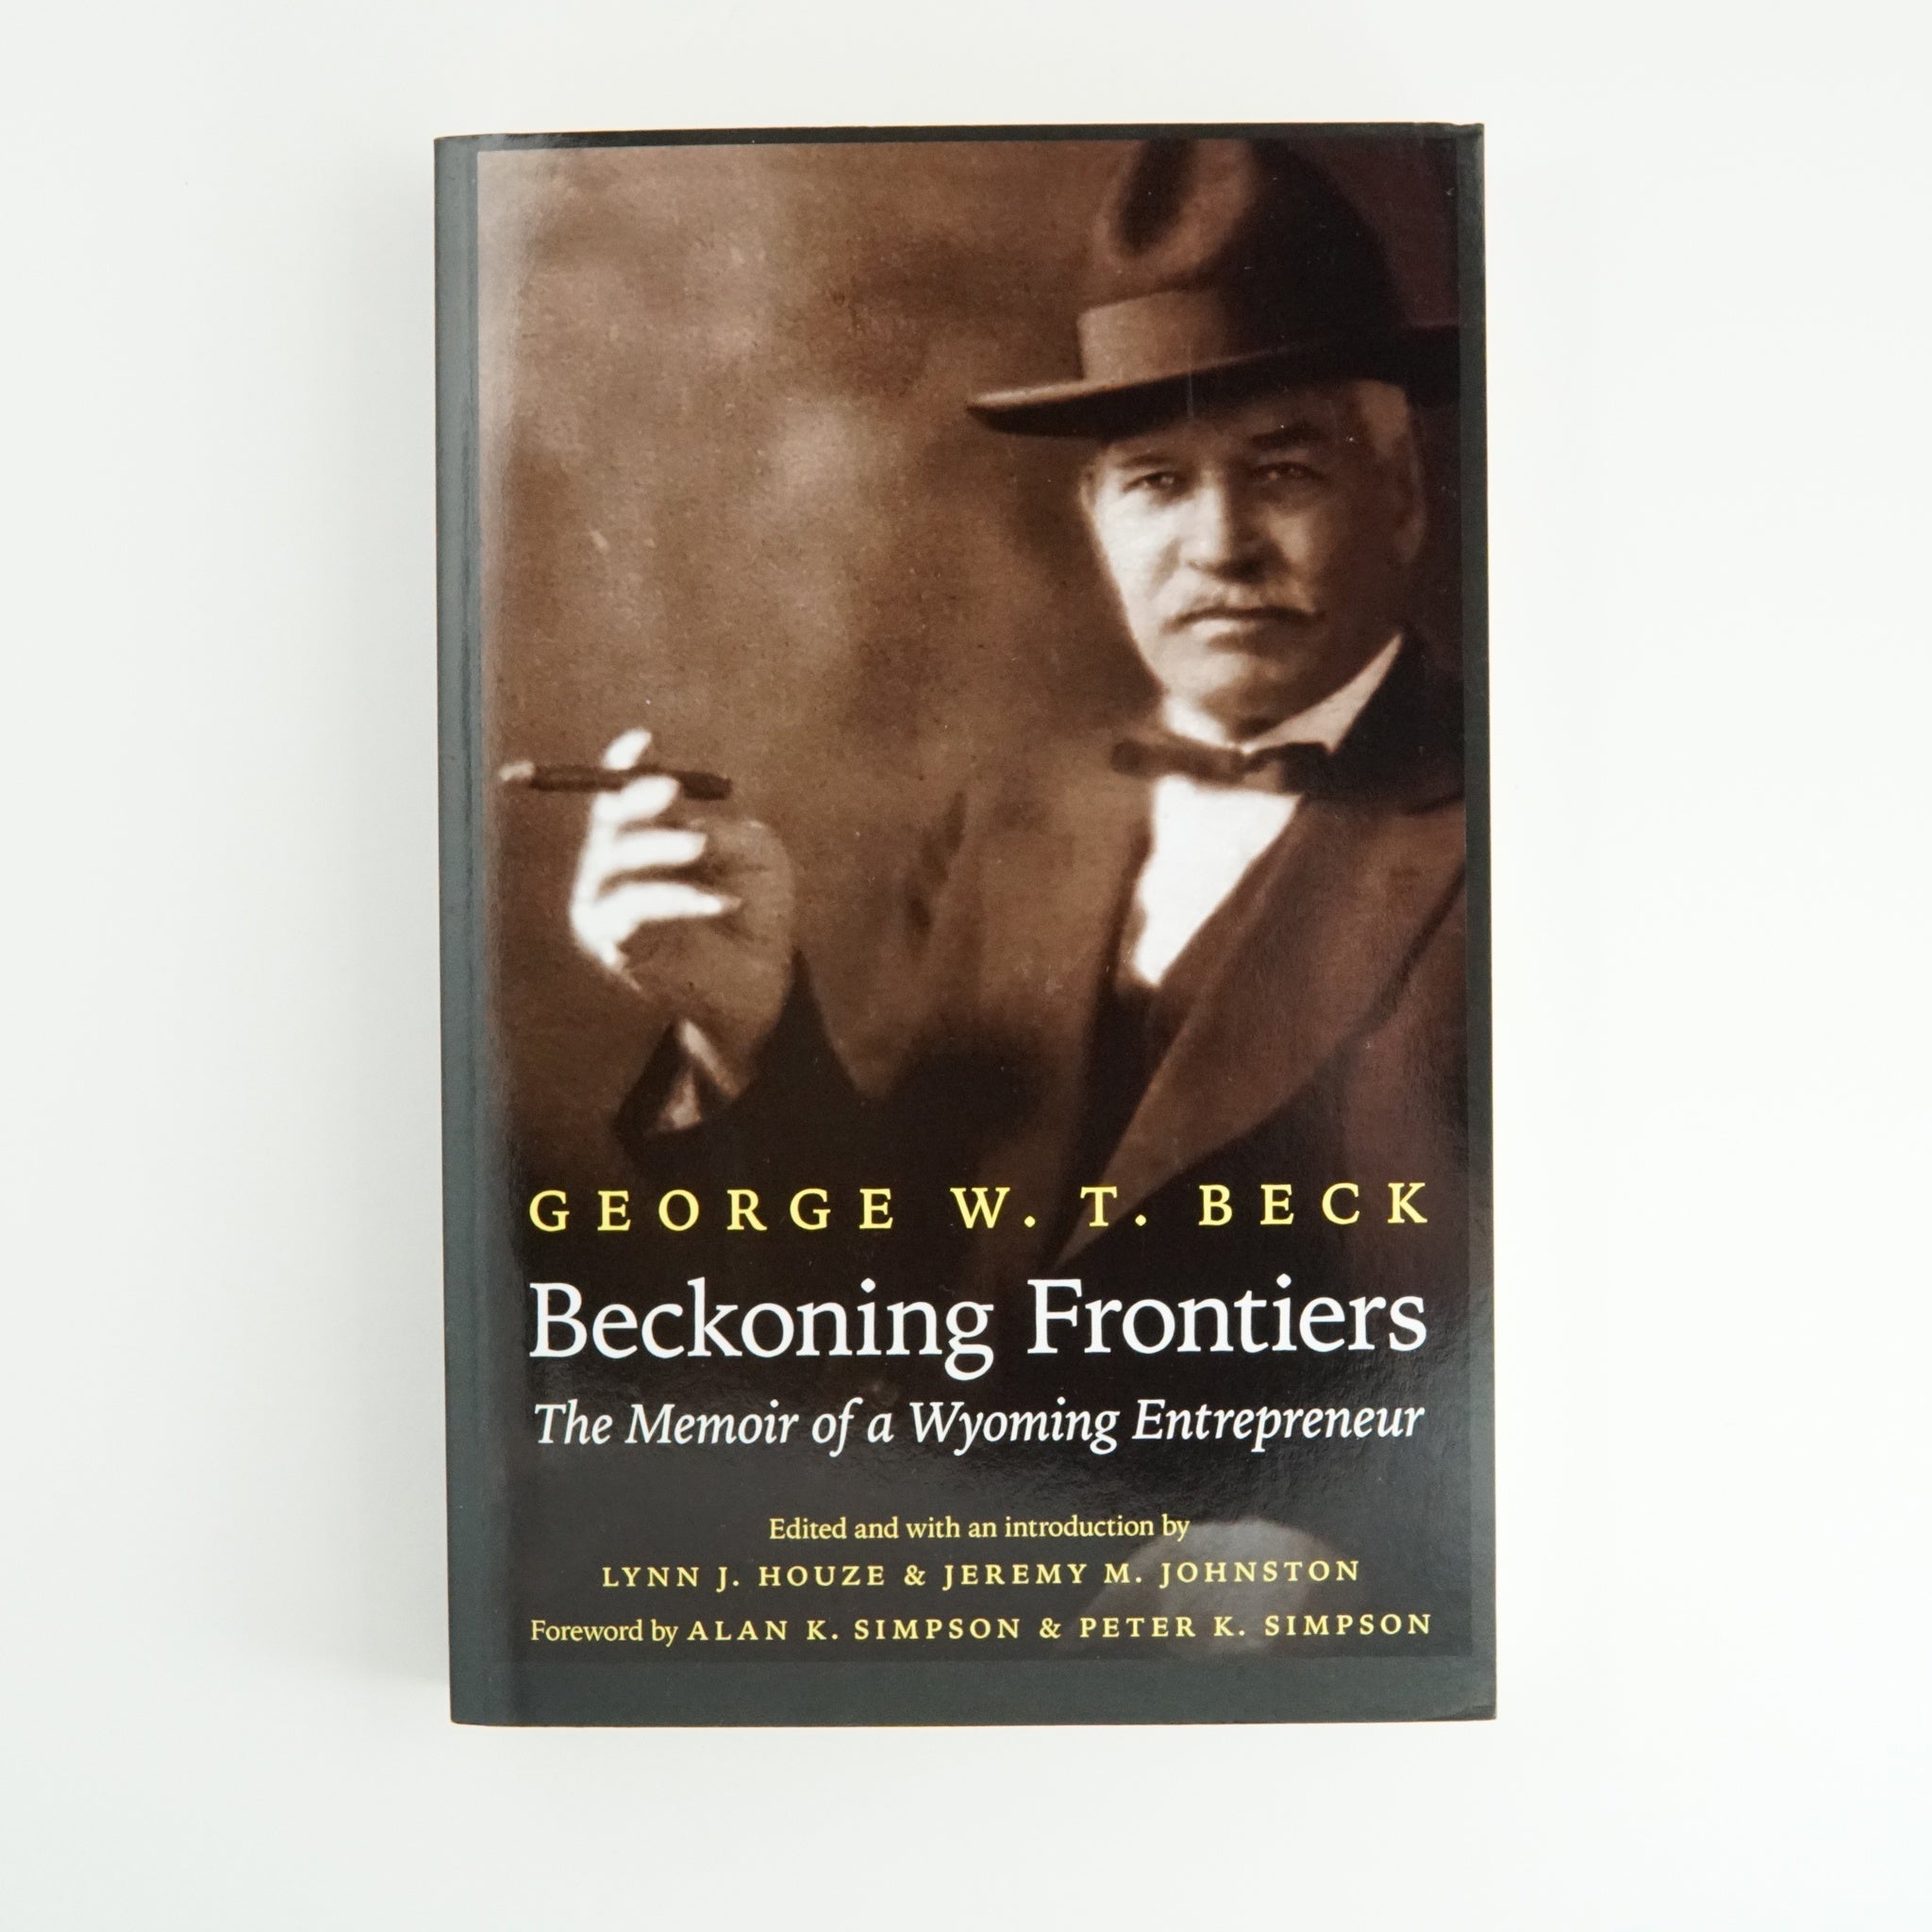 BK 9 BECKONING FRONTIERS BY GEORGE  W.  T. BECK EDITED BY LYNN J. HOUZE & JEREMY M. JOHNSTON #11840 D2 MAY23